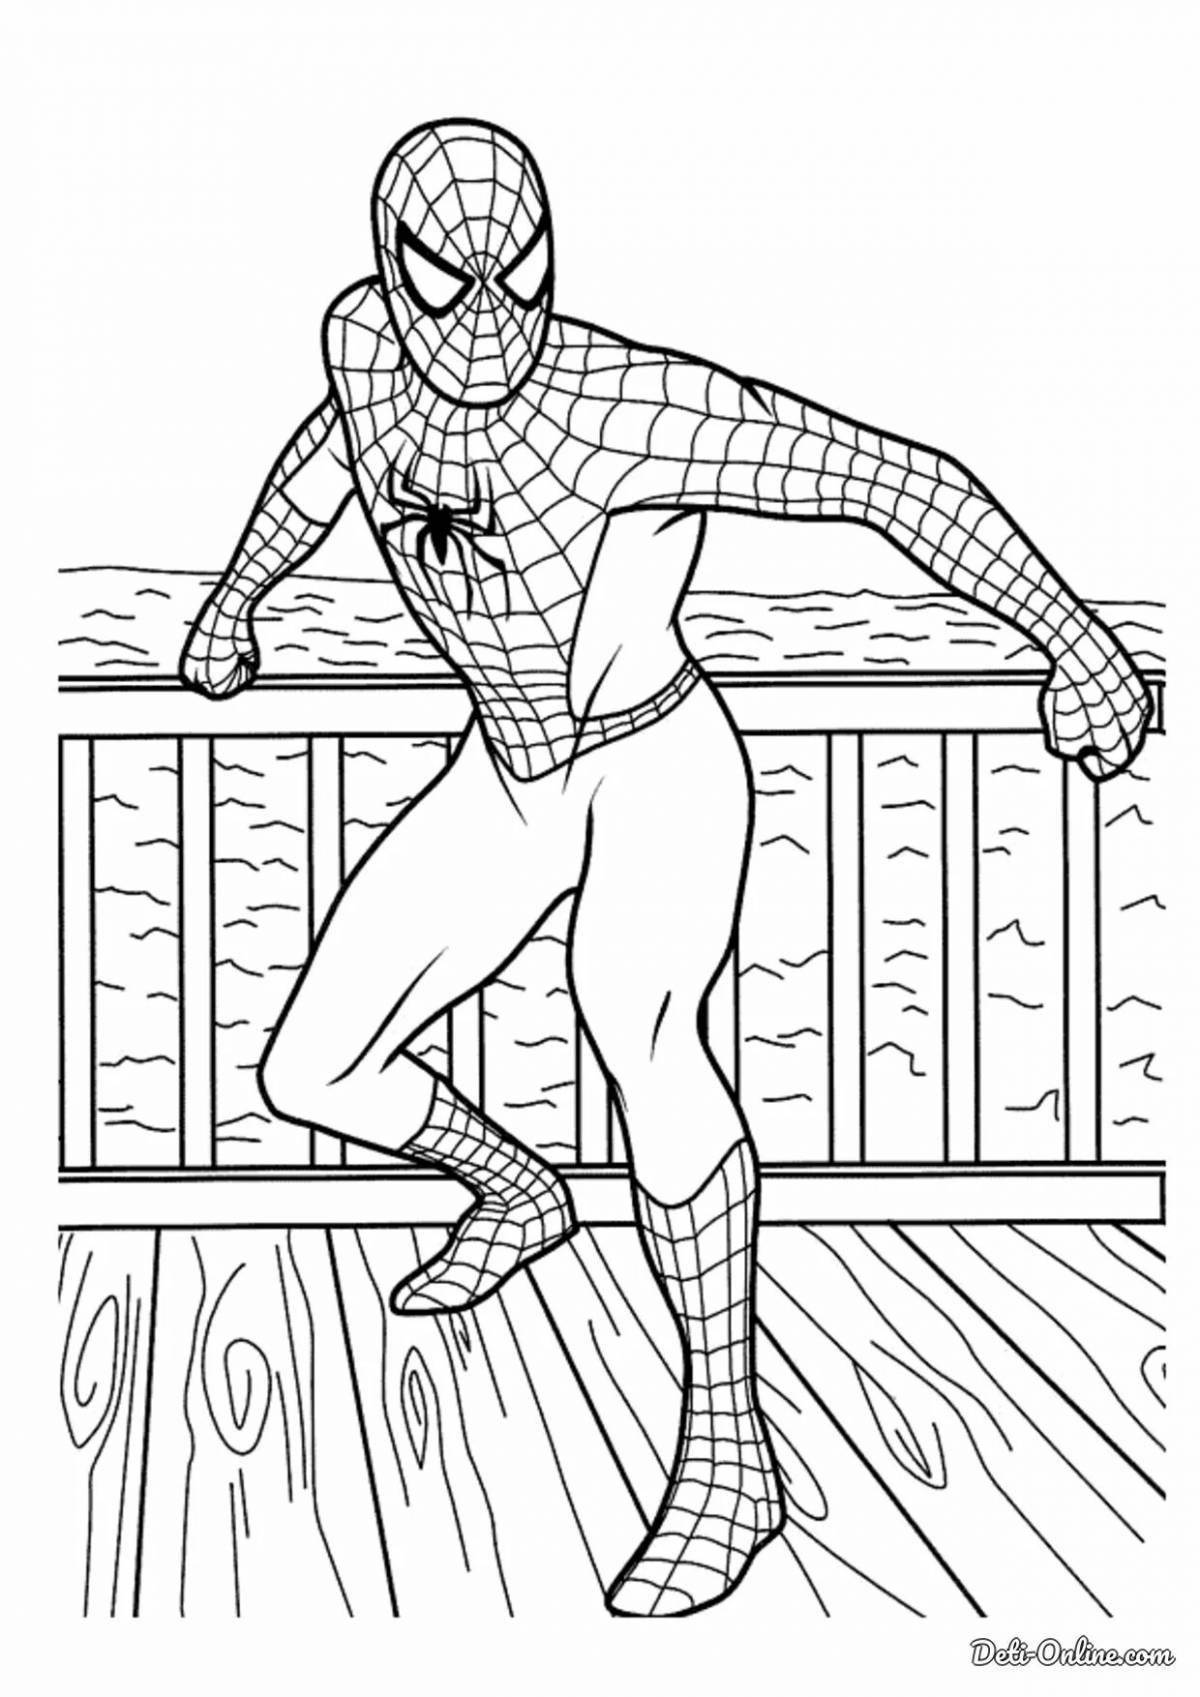 Great drawing of spider-man